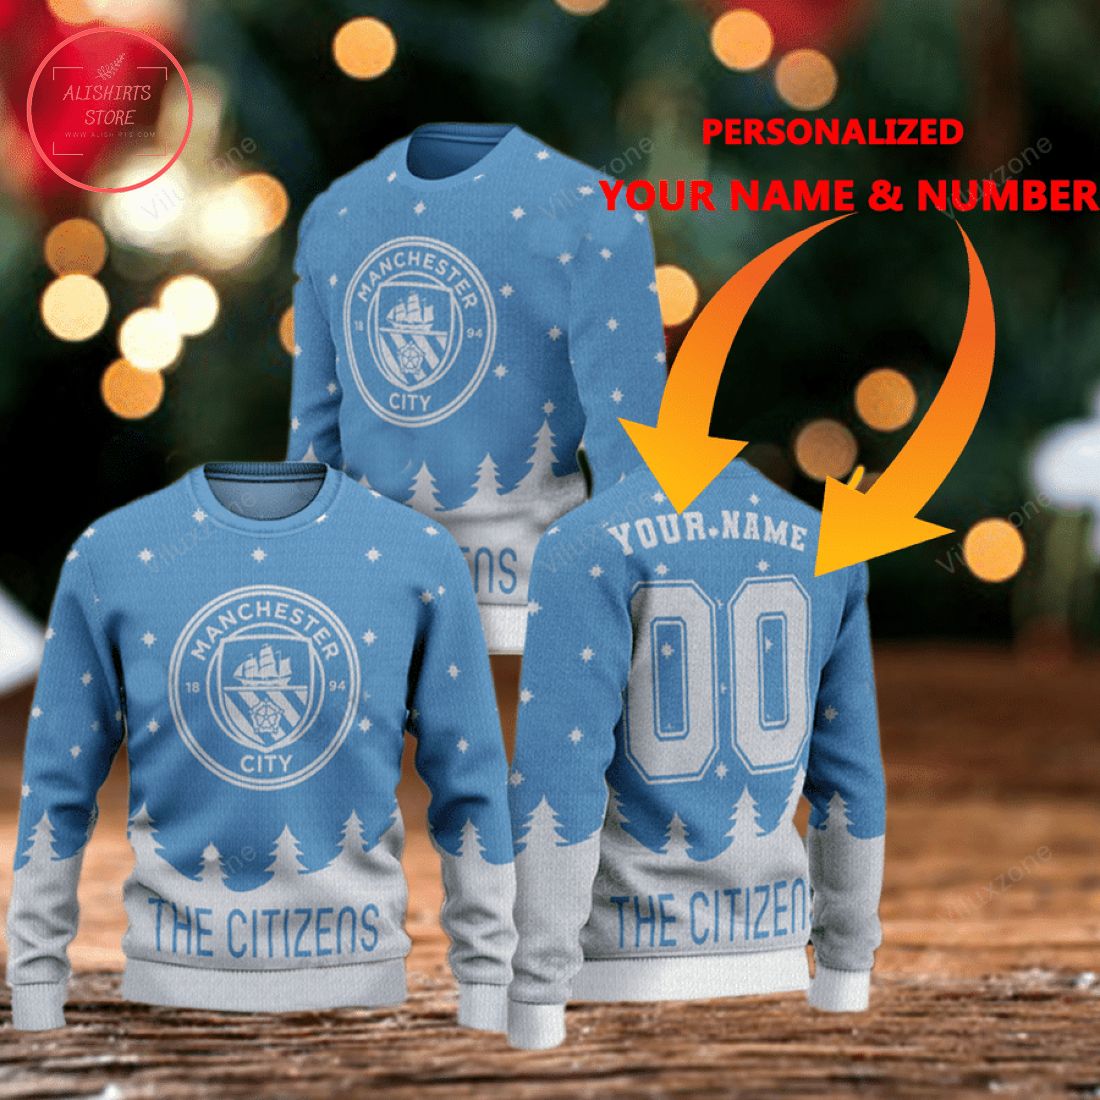 Man City Fc The Citizens Personalized Ugly Christmas Sweater